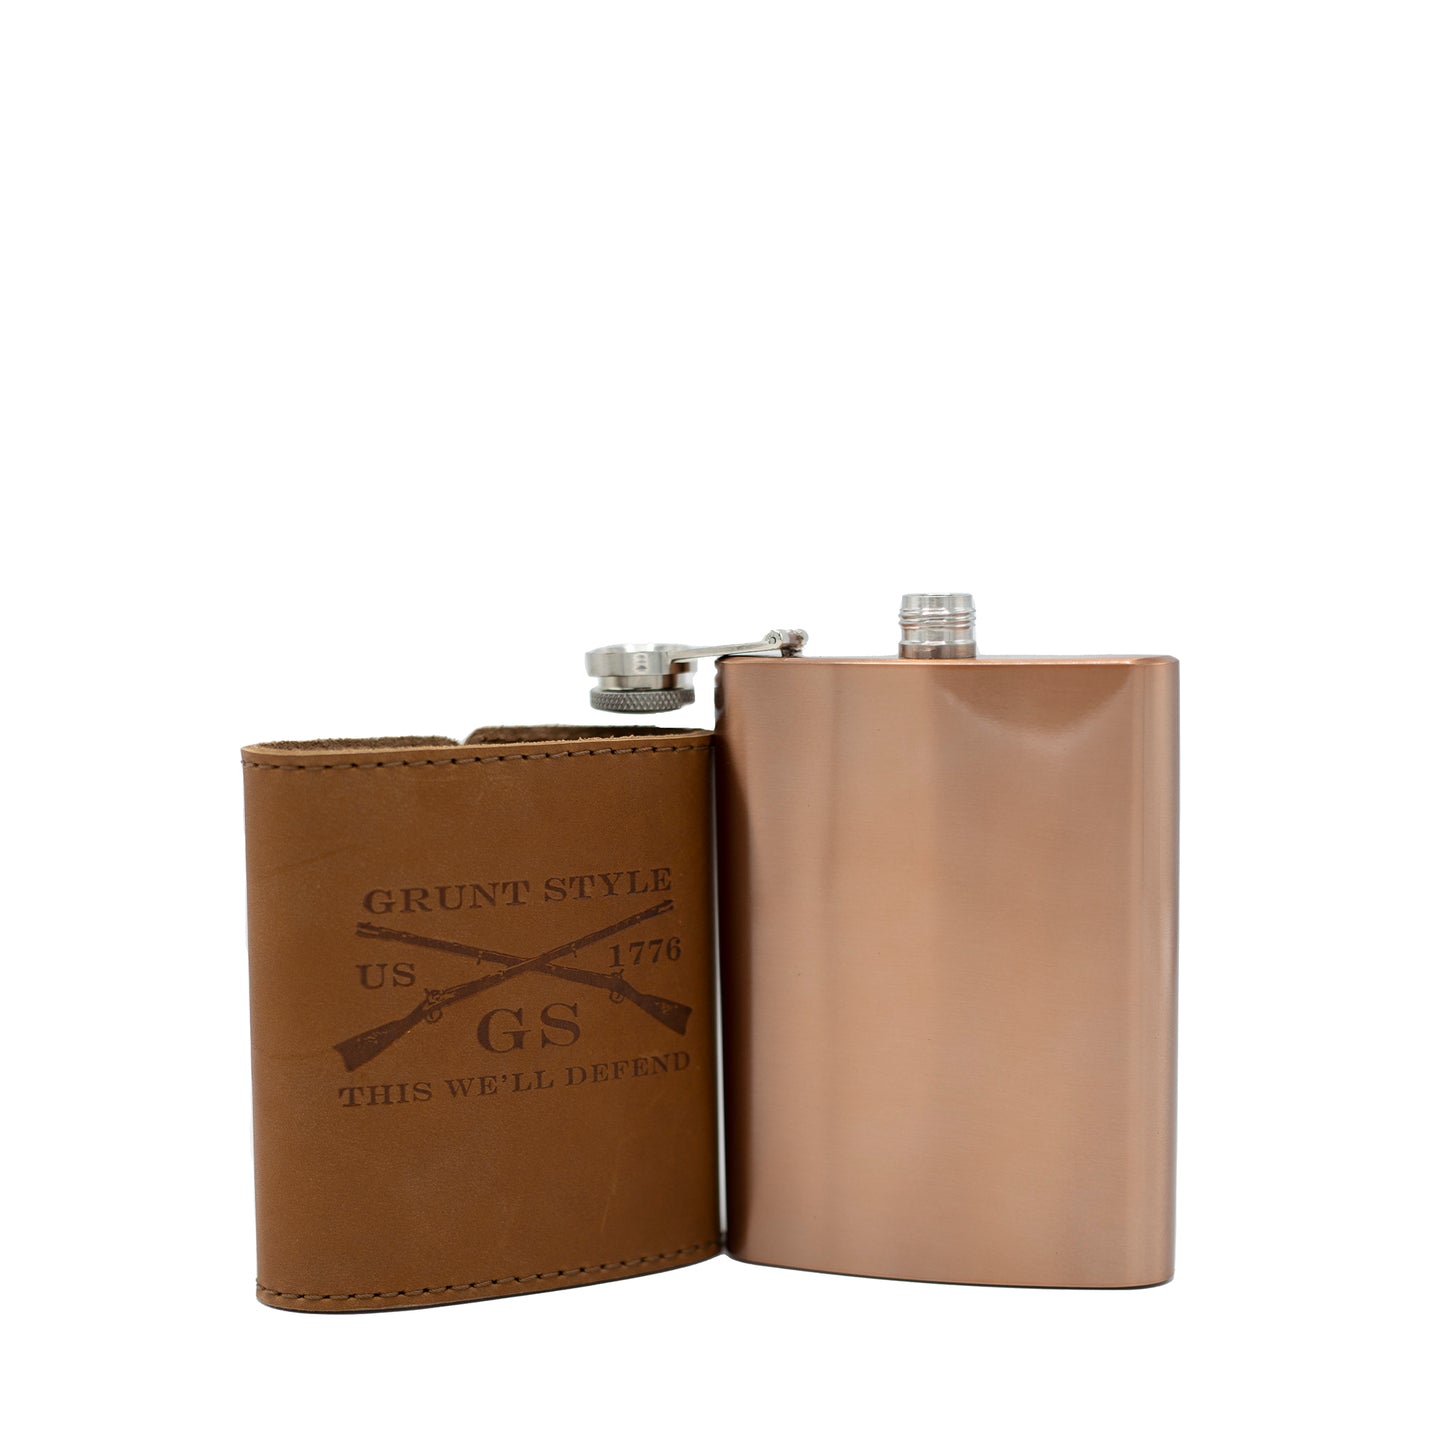 Removable Flask with Leather Wrap  | Grunt Style 